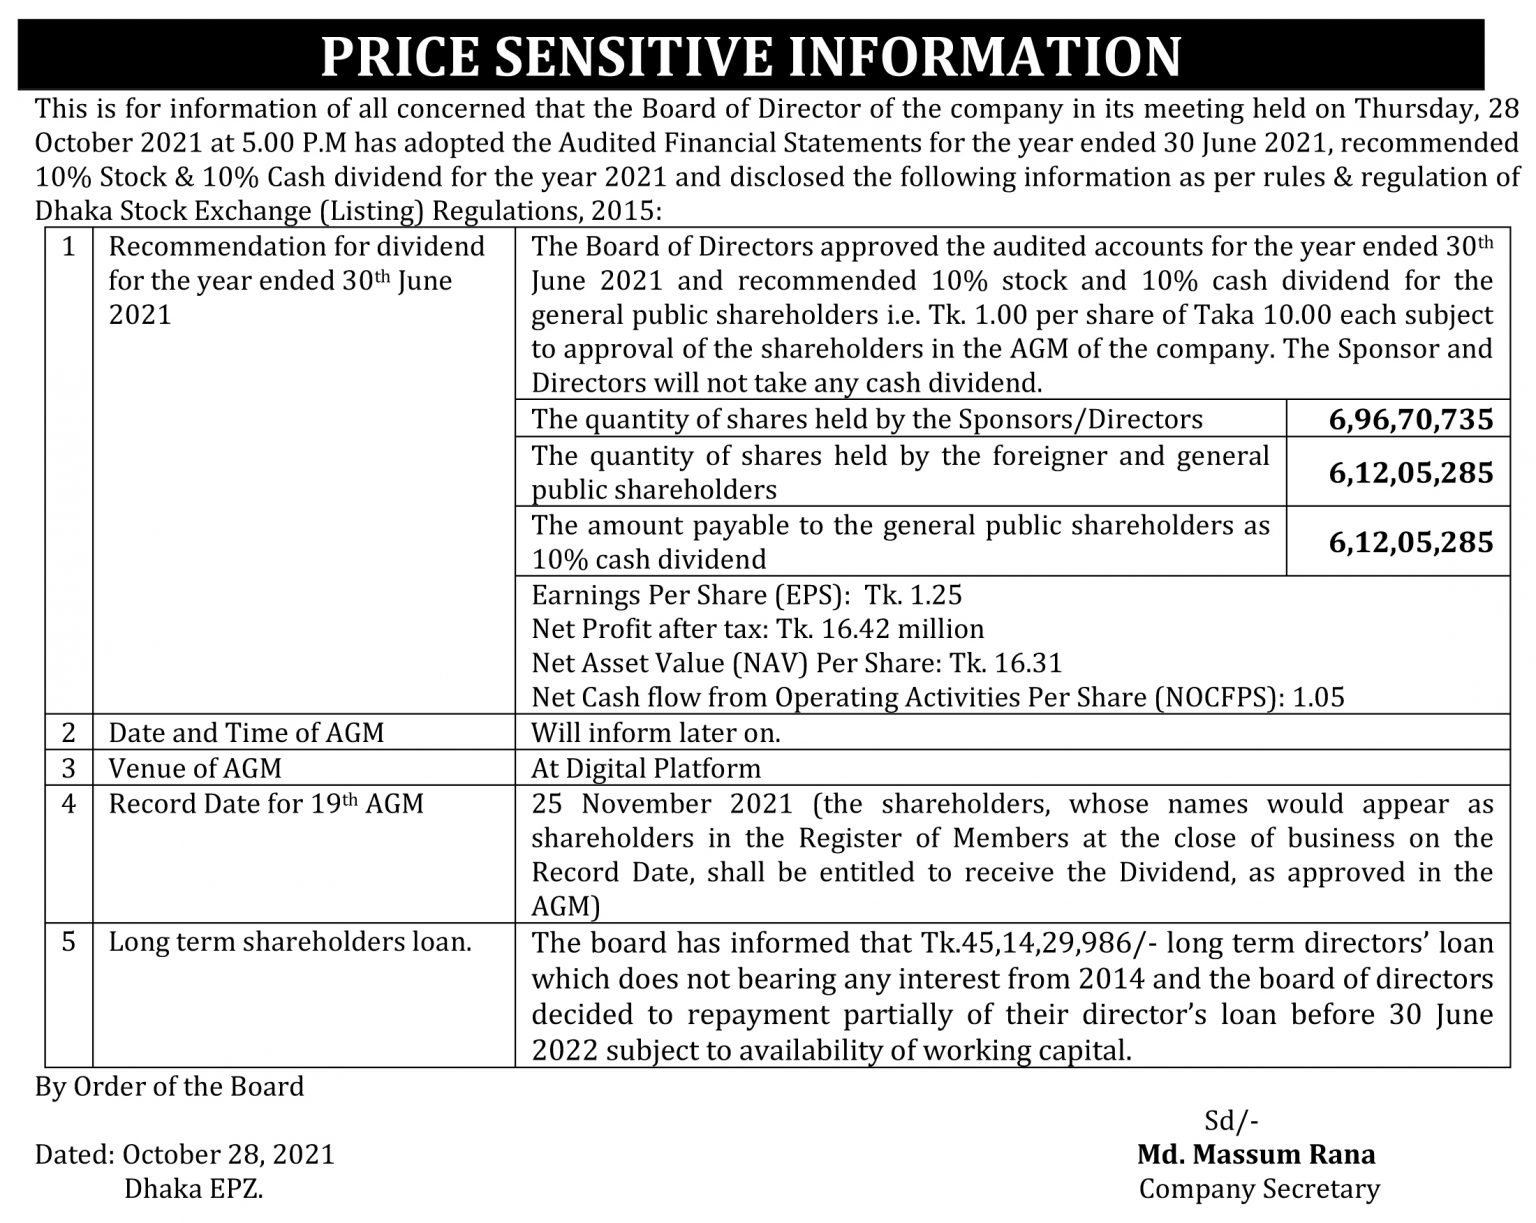 Price Sensitive Information of Queen South Textile Mills Limited